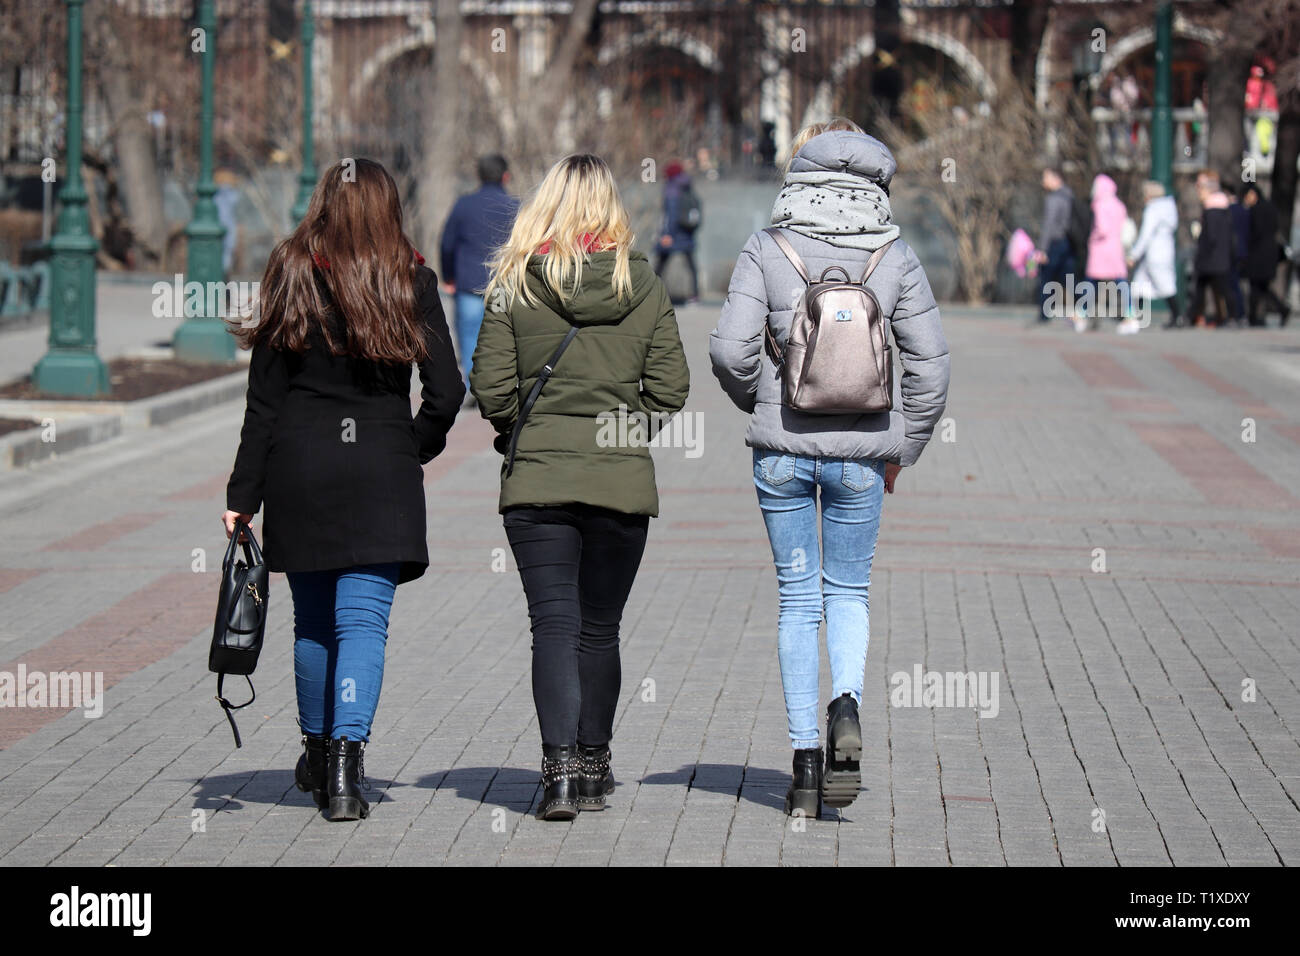 Three girls in jackets and jeans walking on a city street in early spring, rear view. Concept of female fashion, friendship, casual clothes Stock Photo